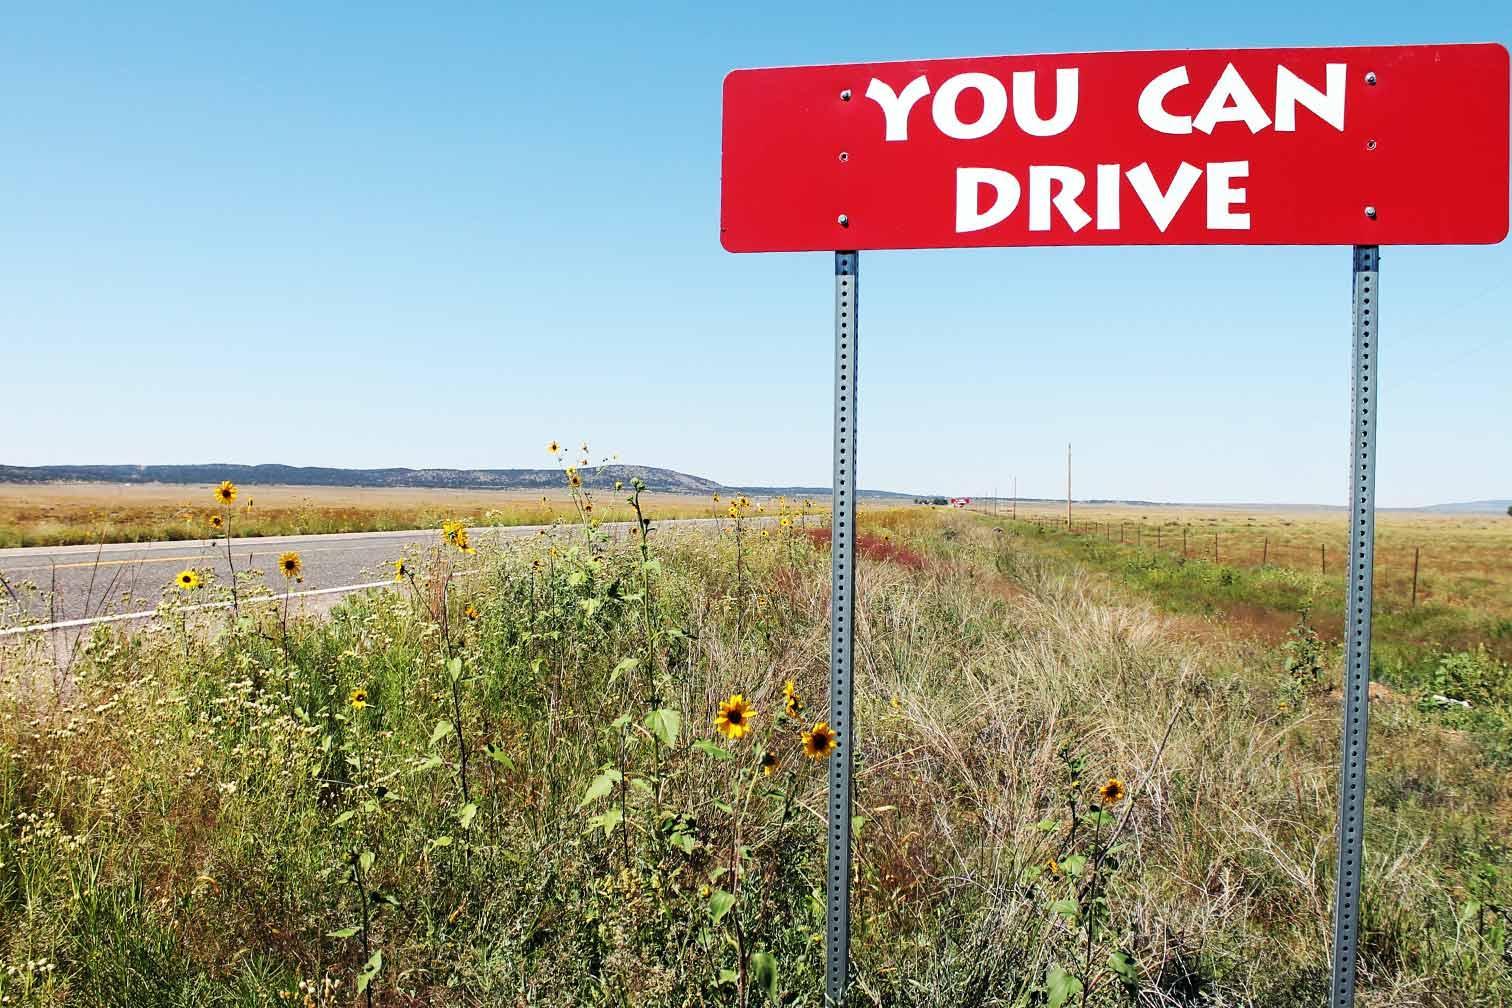 Burma-shave sign along Route 66 in Arizona